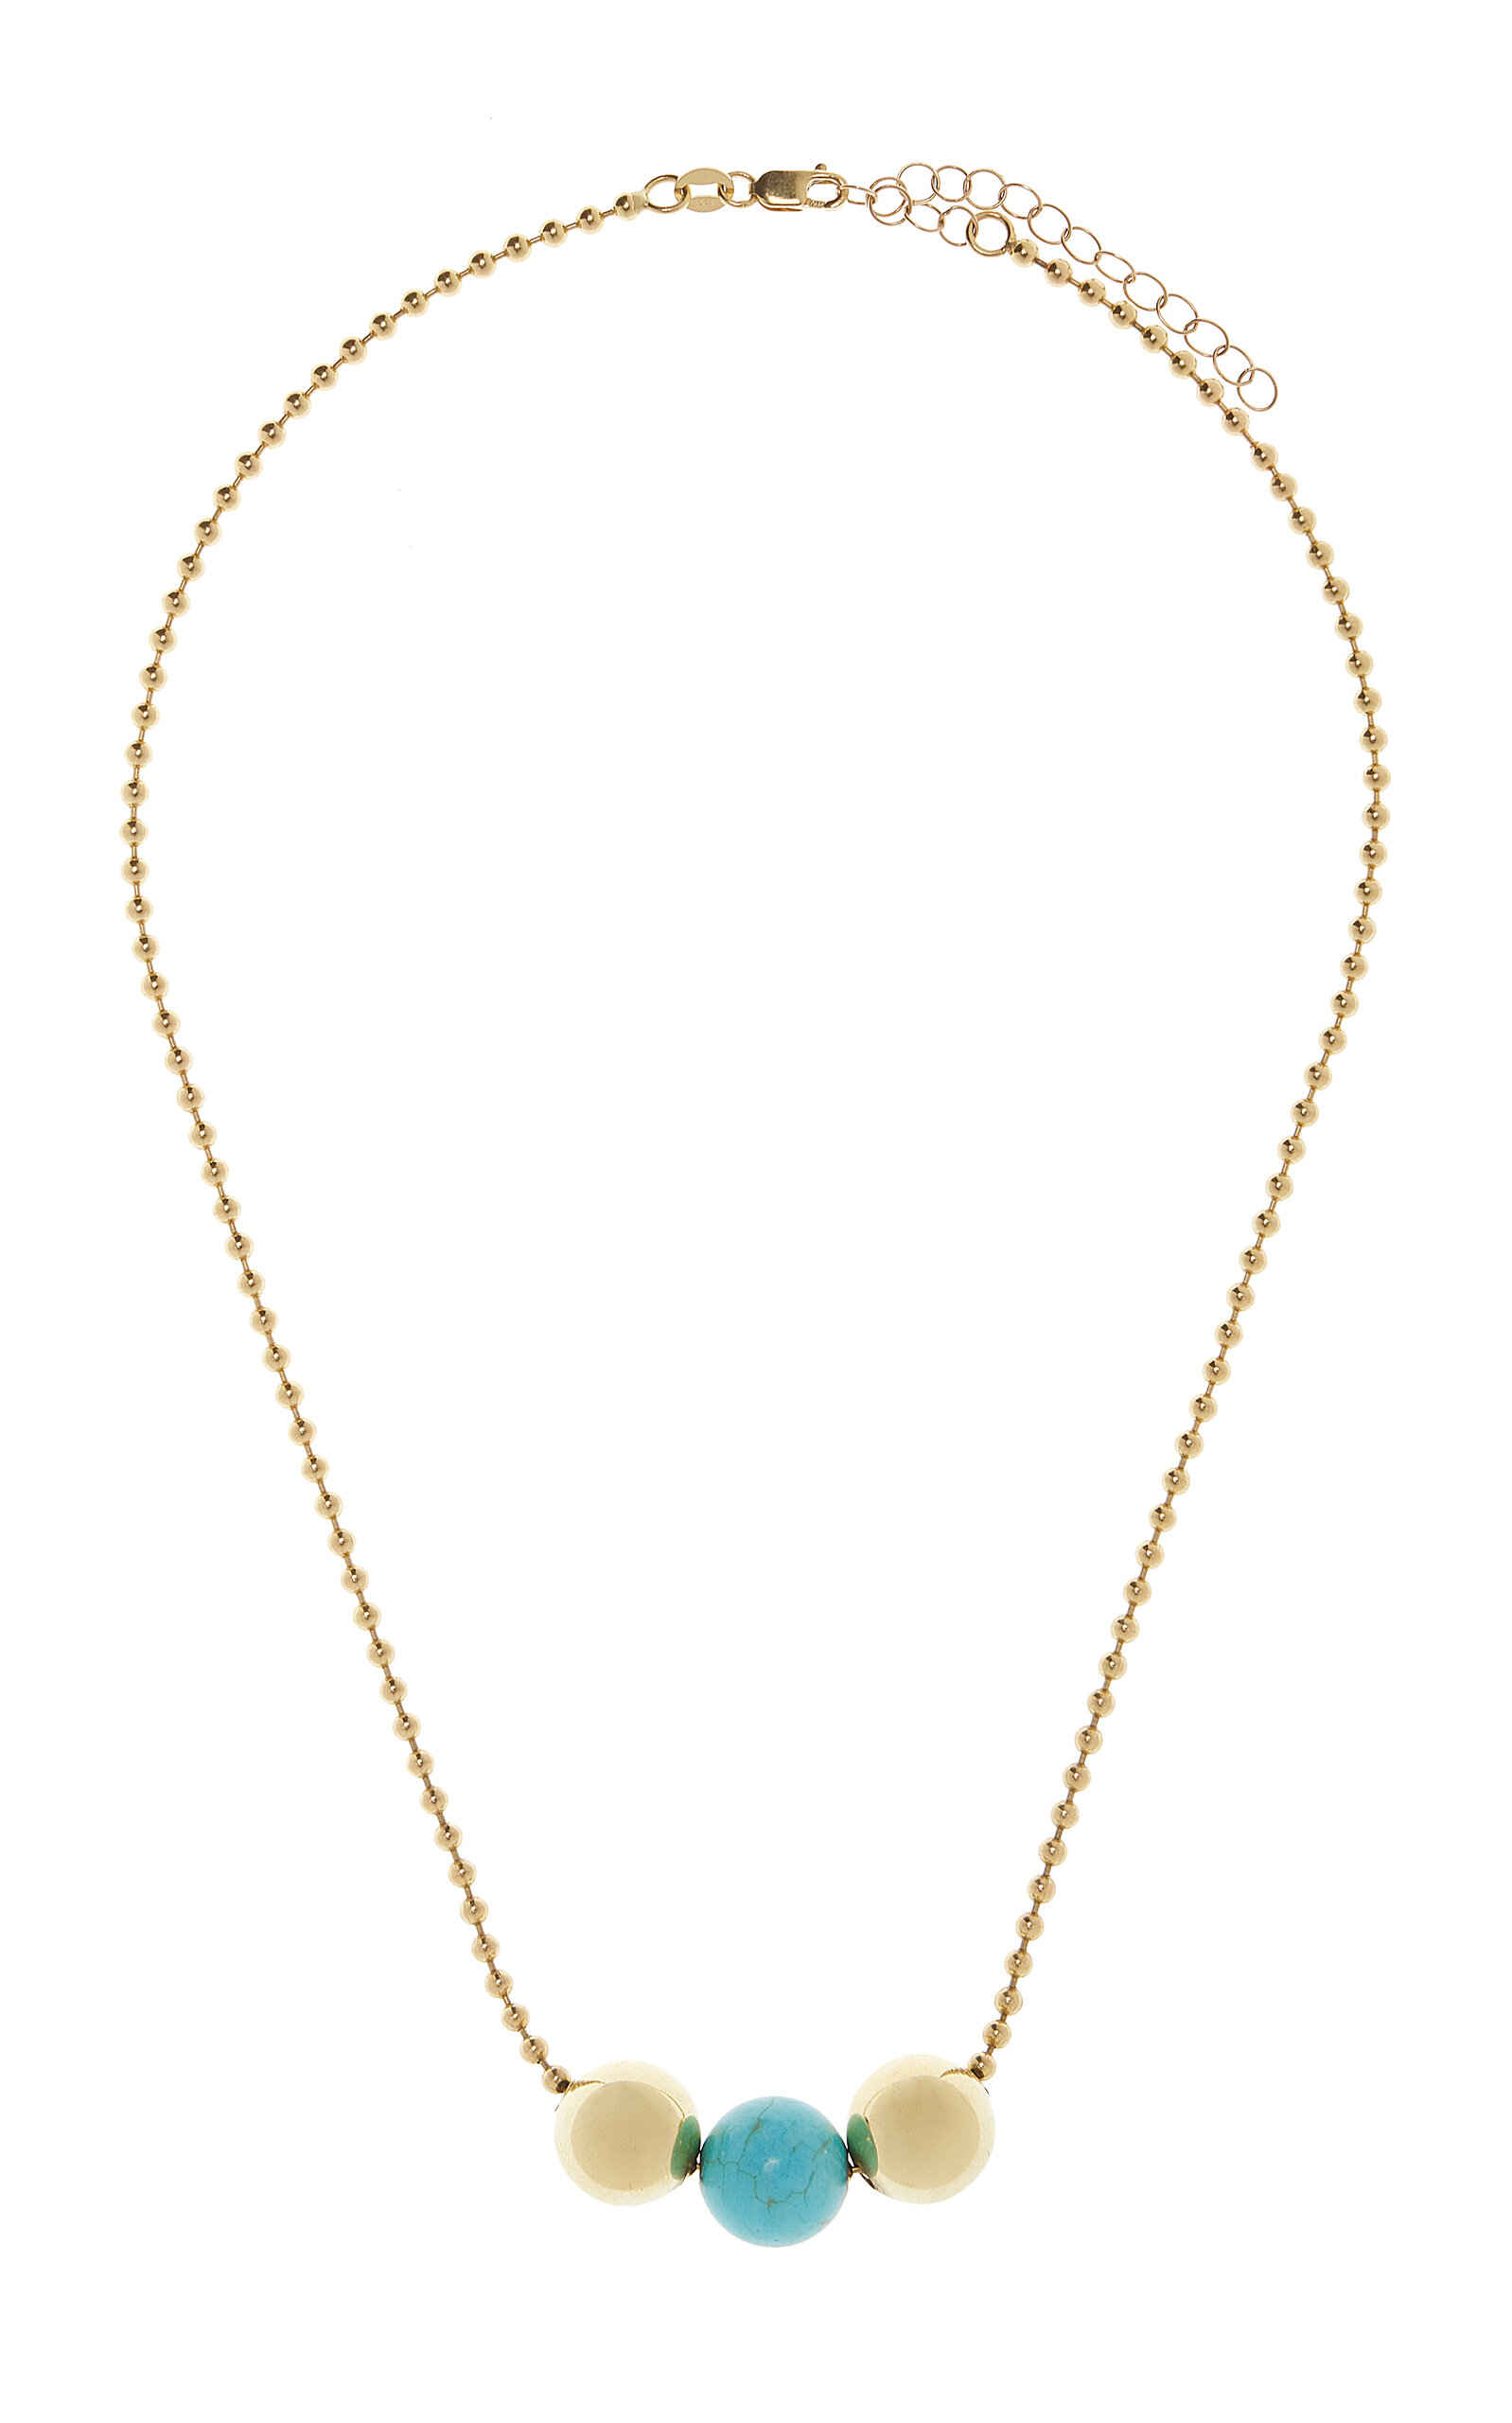 Jenna Blake 18k Gold Turquoise Three Ball Chain Necklace In Blue